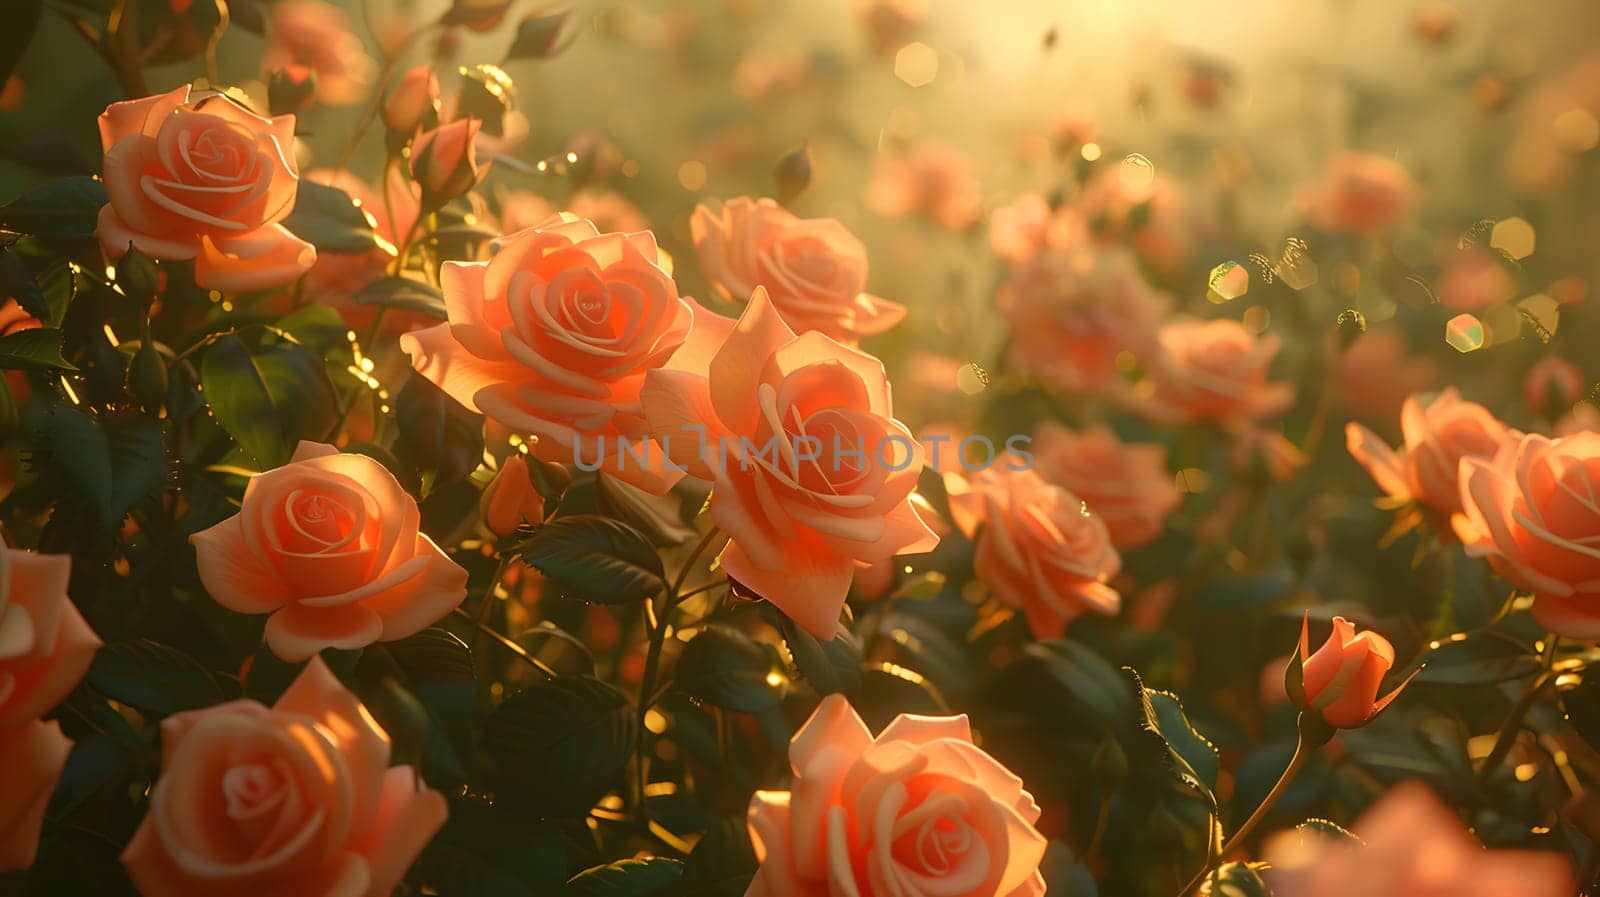 A beautiful field of hybrid tea roses with orange petals, shining under the sun. The roses stand tall among the lush green grass, creating a picturesque scene